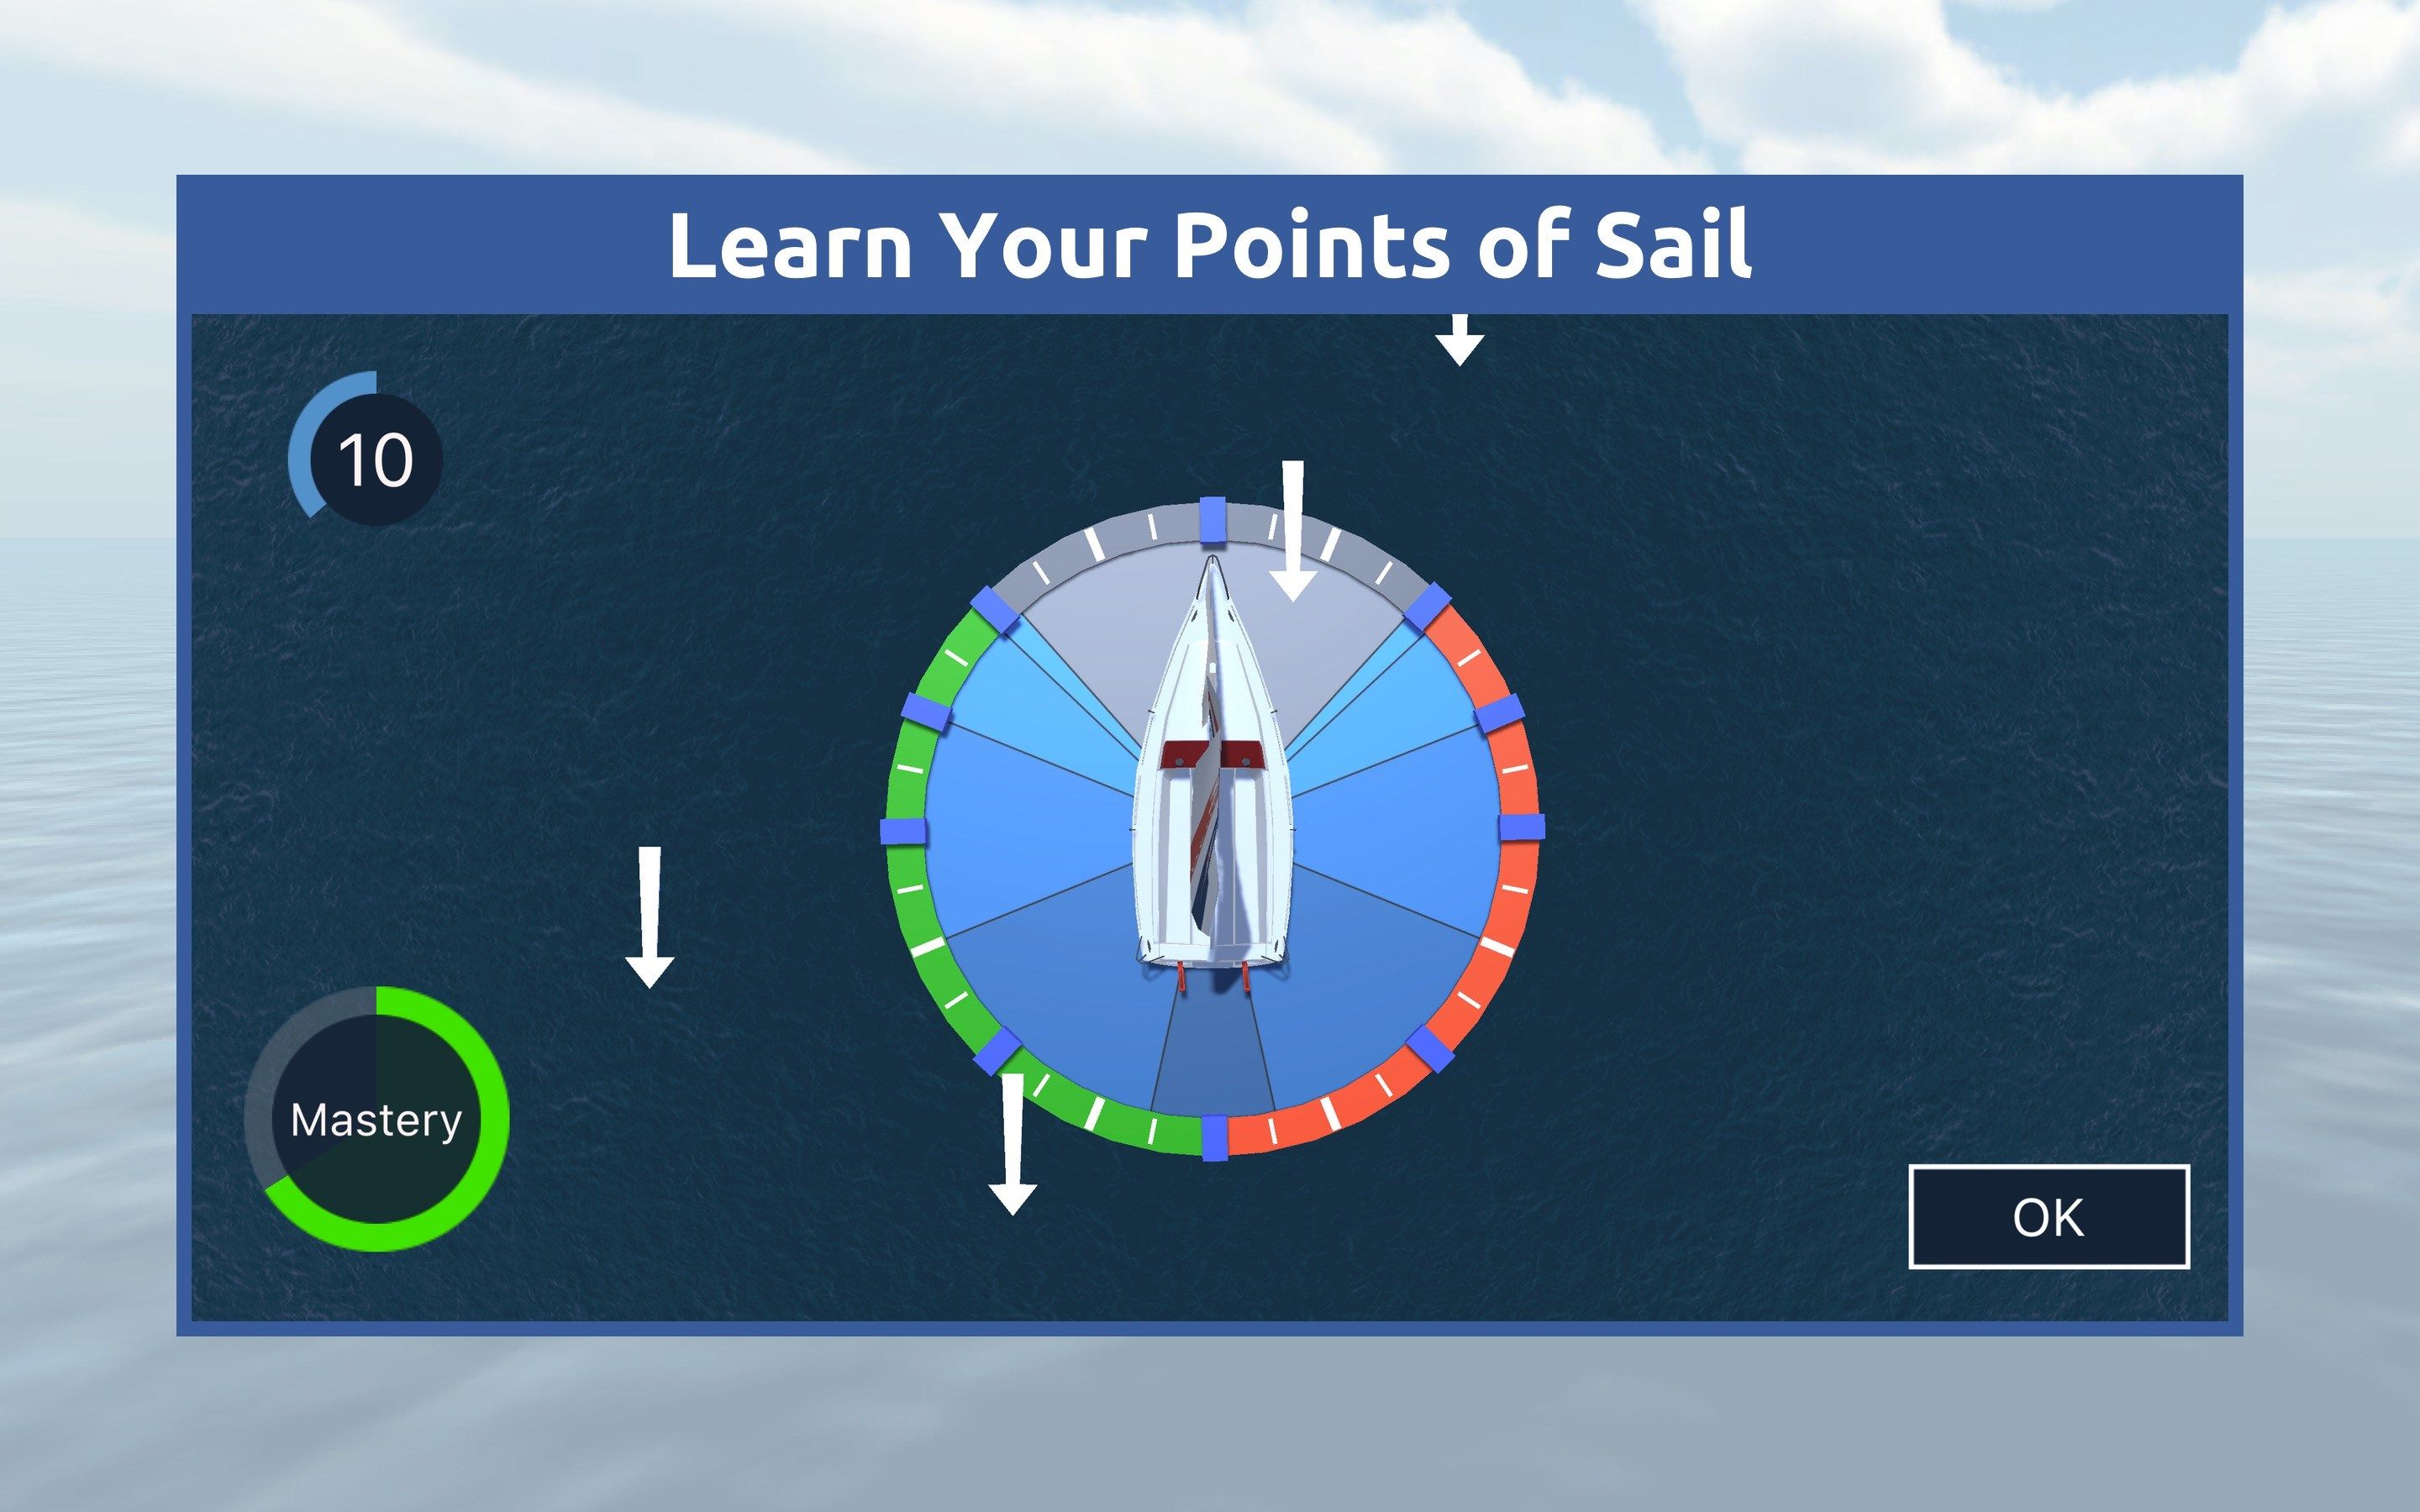 To become a sailor you need to understand the points of sail – the orientation of the boat relative to the wind. This module first teaches you the points of sail before testing your knowledge with a fun game. If you think you’re already a master then try our challenge mode!